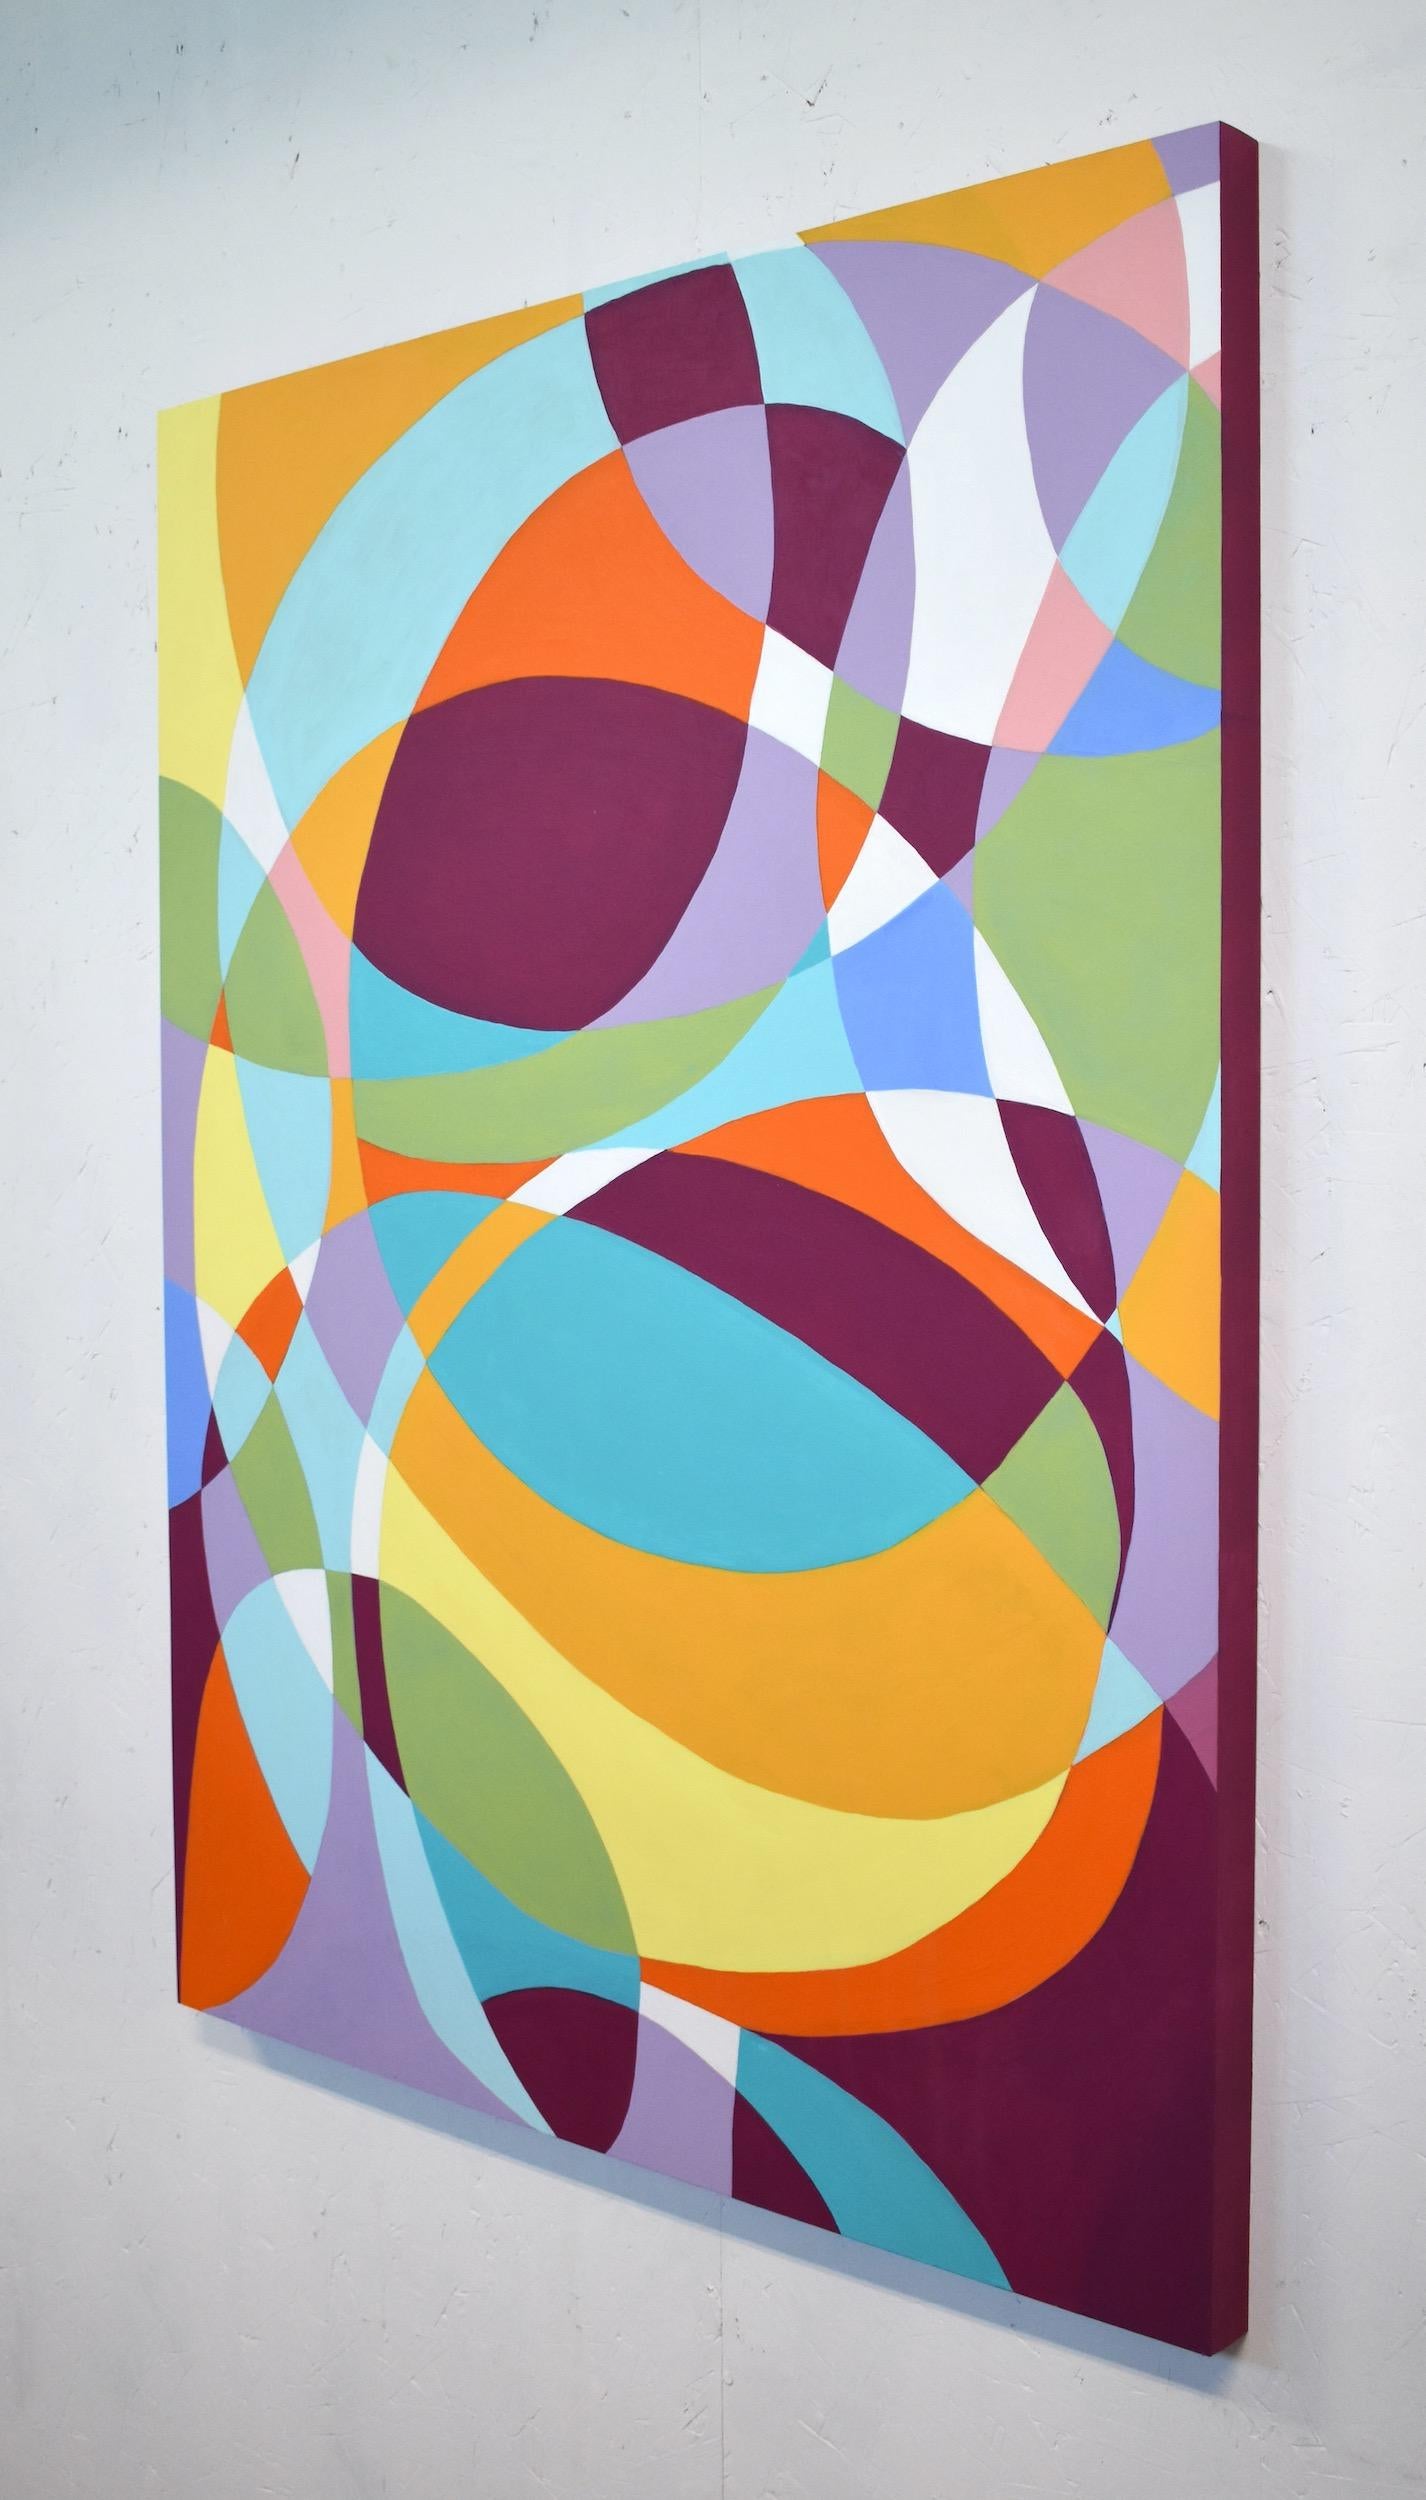 Denise Driscoll’s “Confluence 2” is a 48 x 36 inch abstract painting of swooping overlapping ovals in brightly saturated color including teal, goldenrod, violet and green with accents of deep cranberry and a rich matte surface. The sides are also a